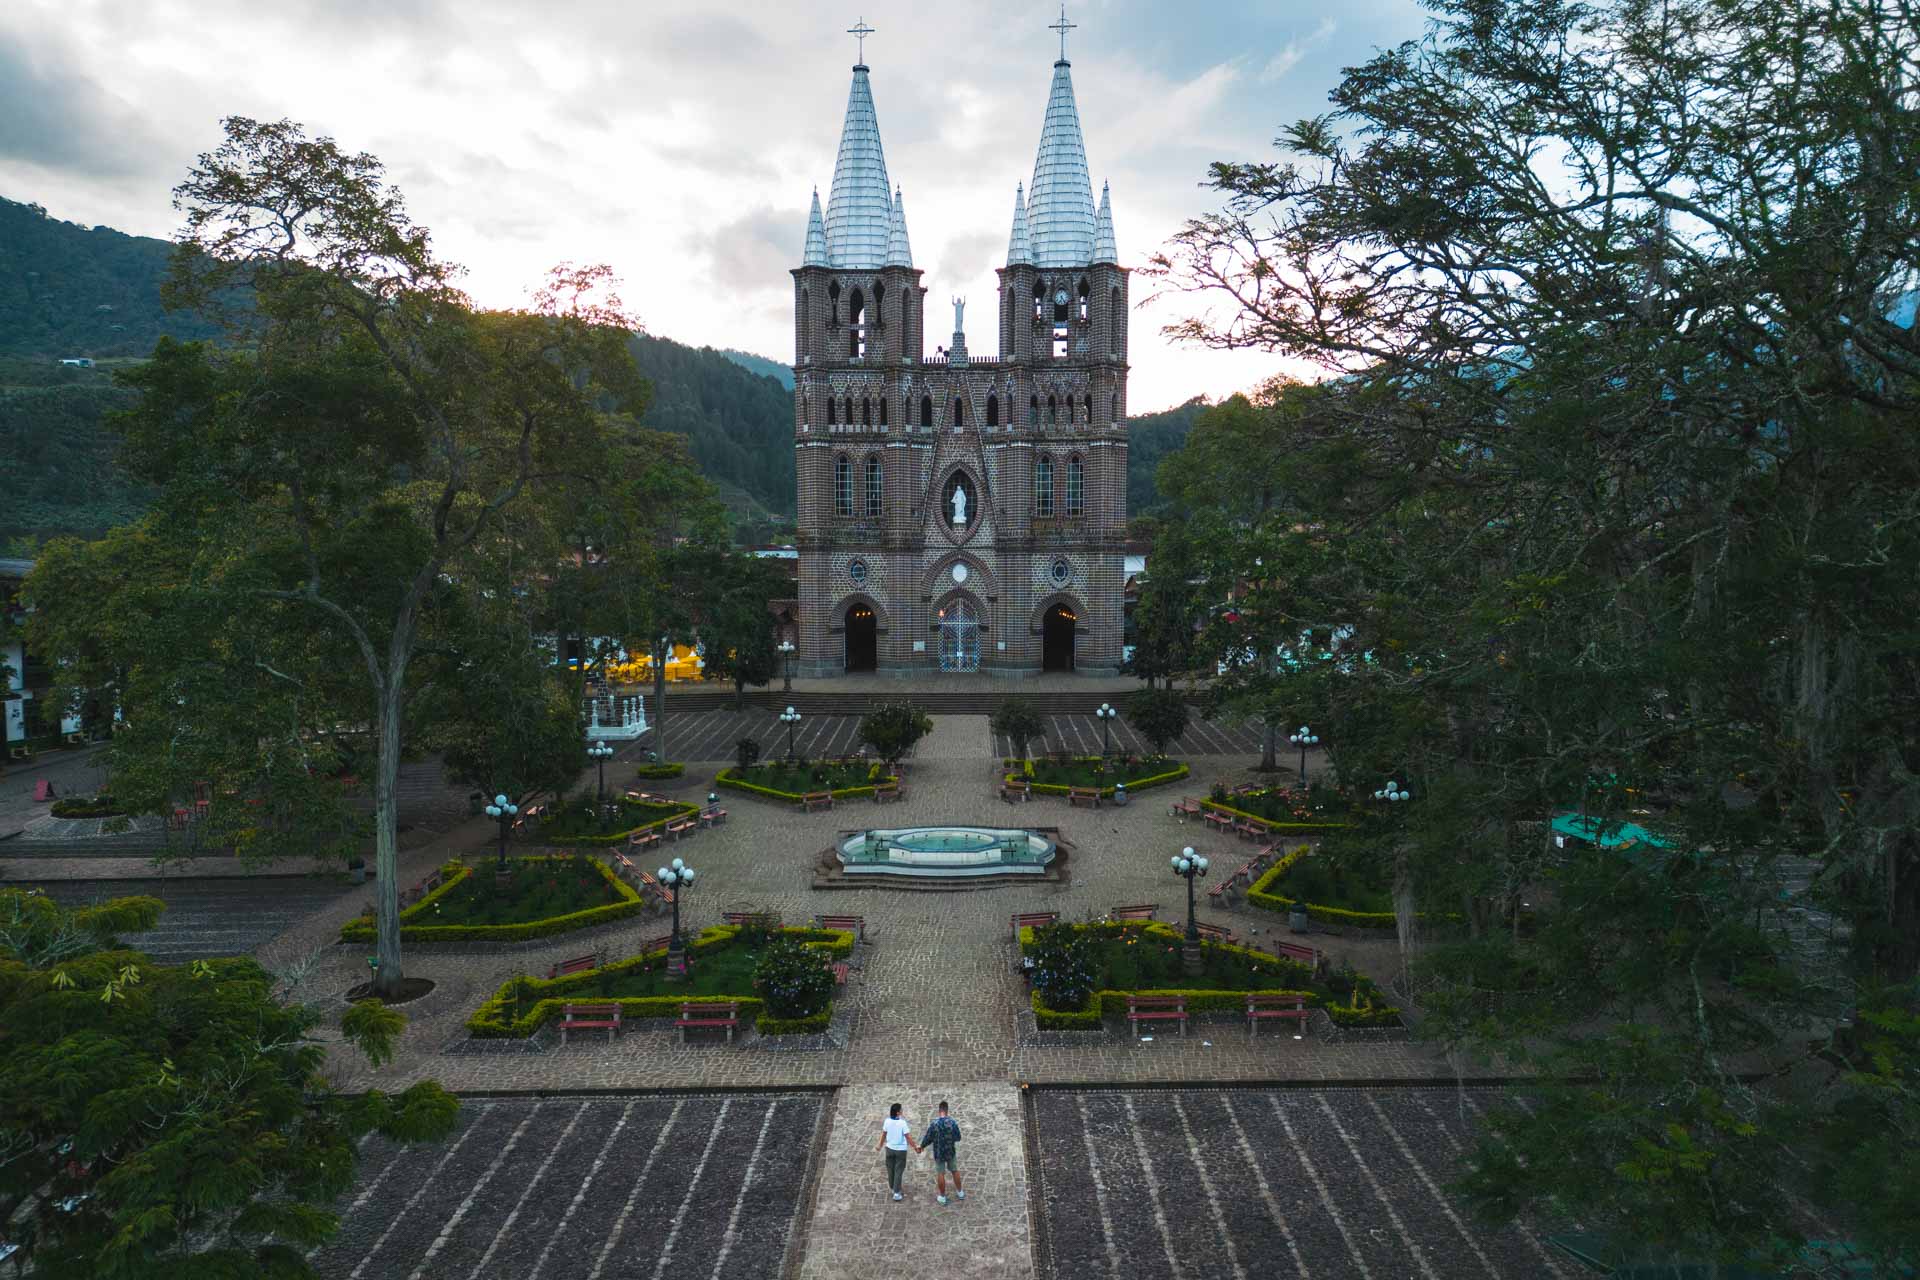 A view of the Basilica of Immaculate Conception in Jardin, Colombia, framed by trees.